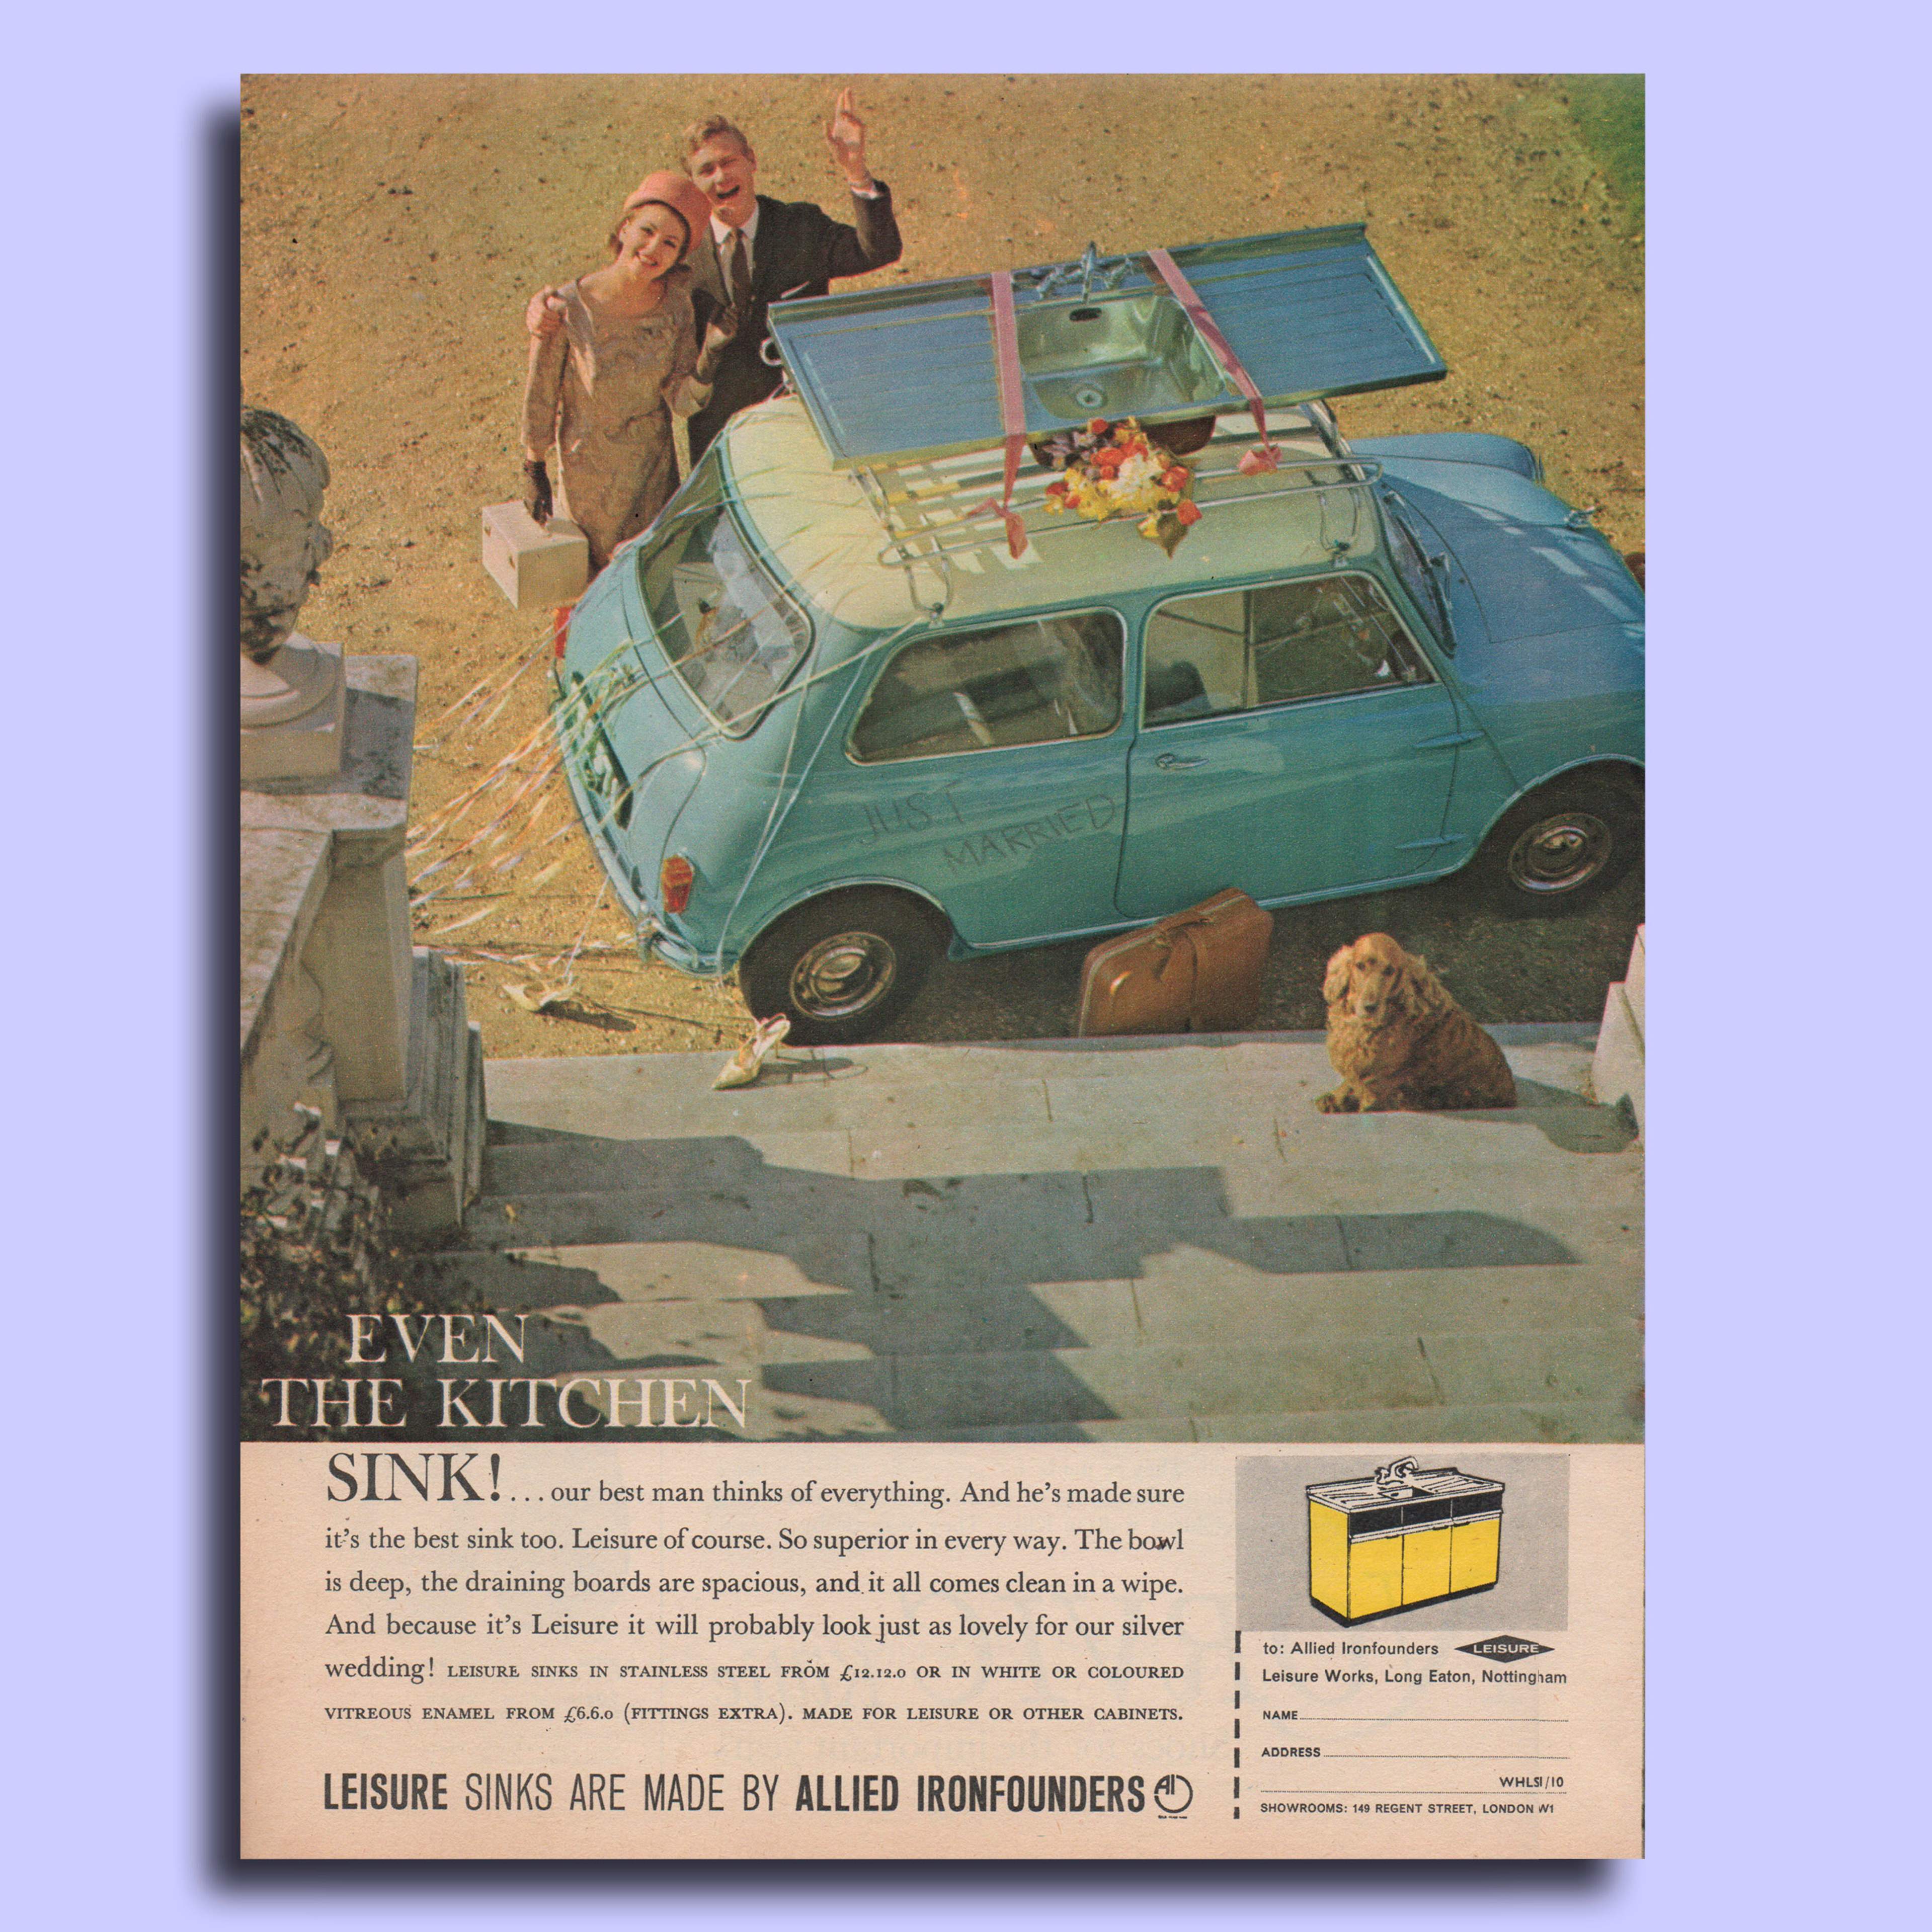 1962 advert for a kitchen sink. Colour photograph of a just married couple with a kitchen sink on the roof of their Mini car.